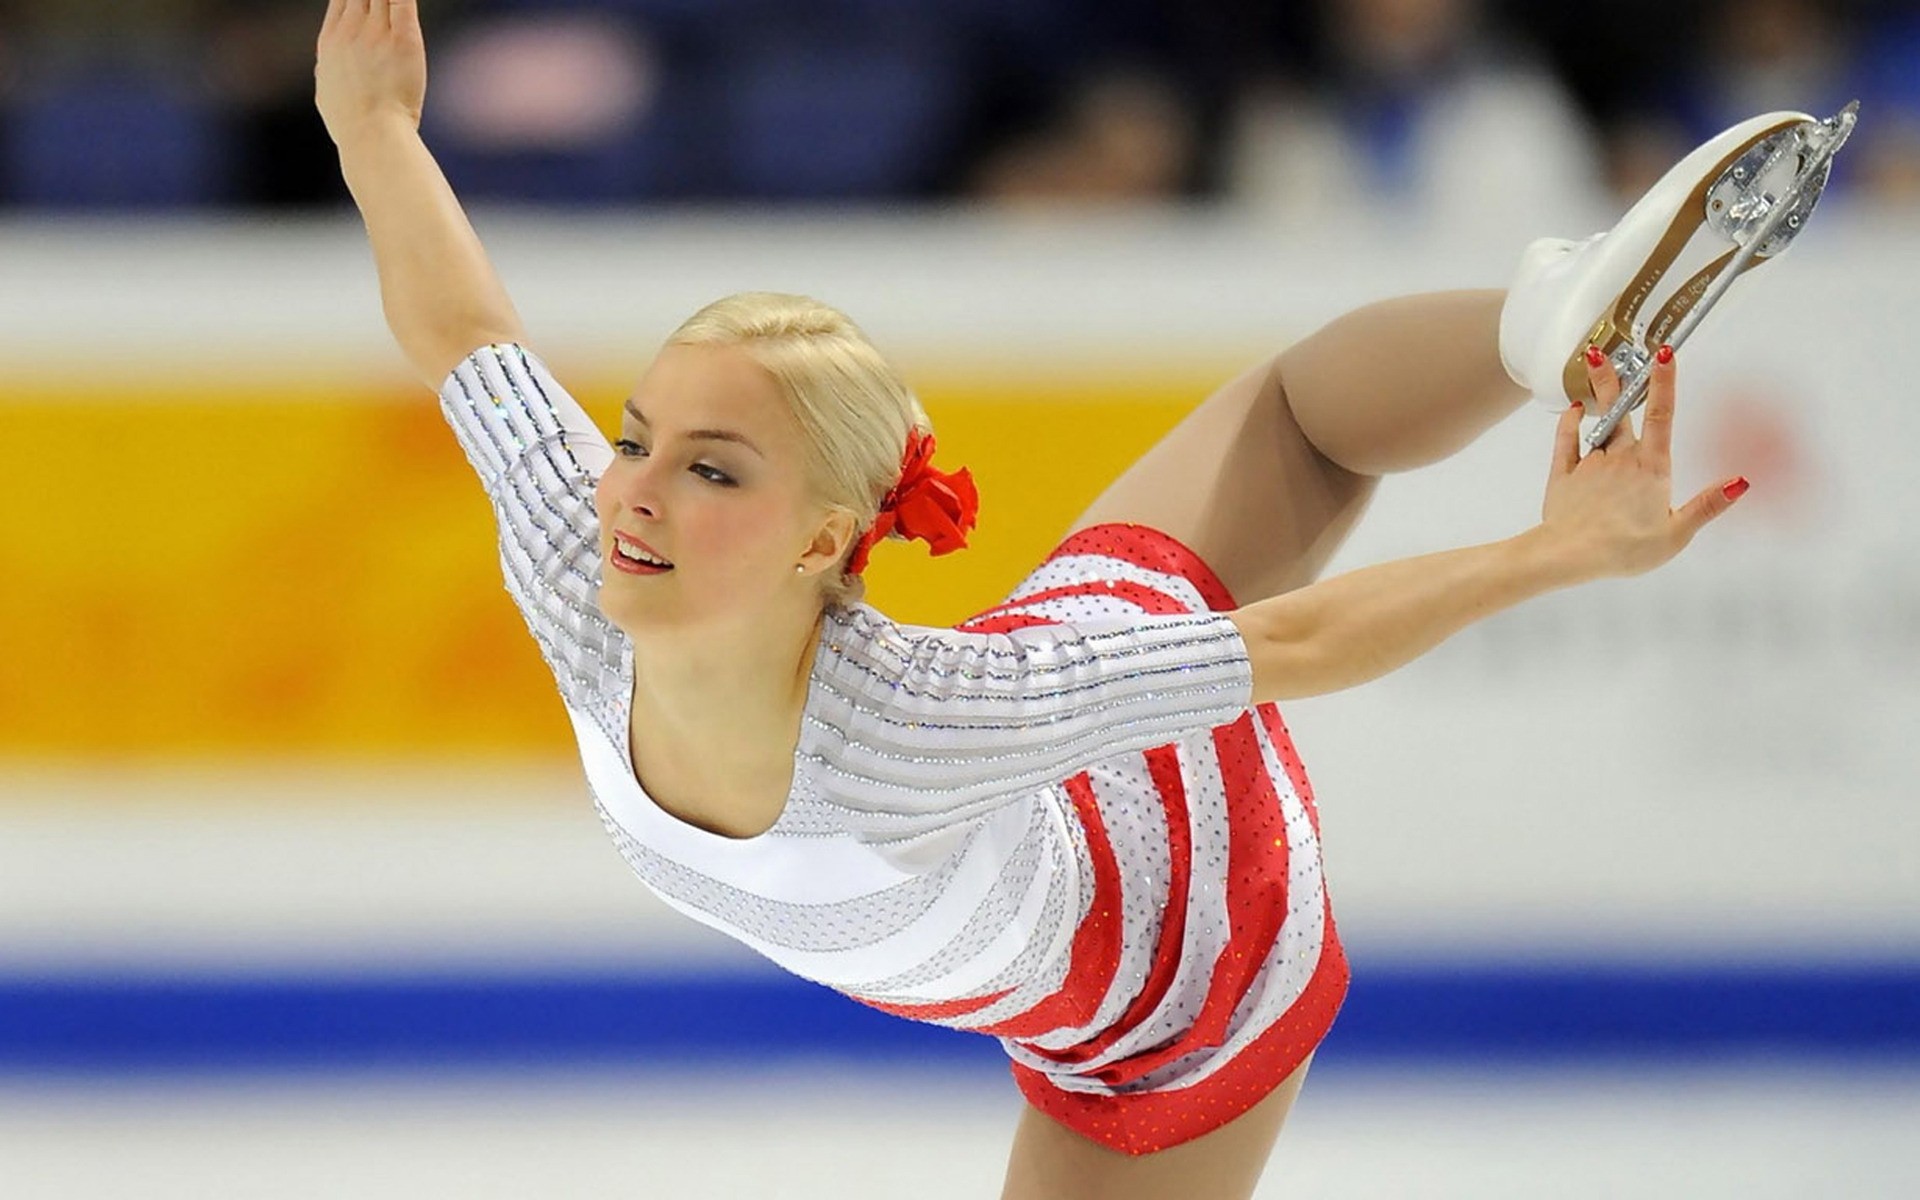 sports gymnastics athlete competition adult strength exercise championship woman class art figure skating ice white blonde